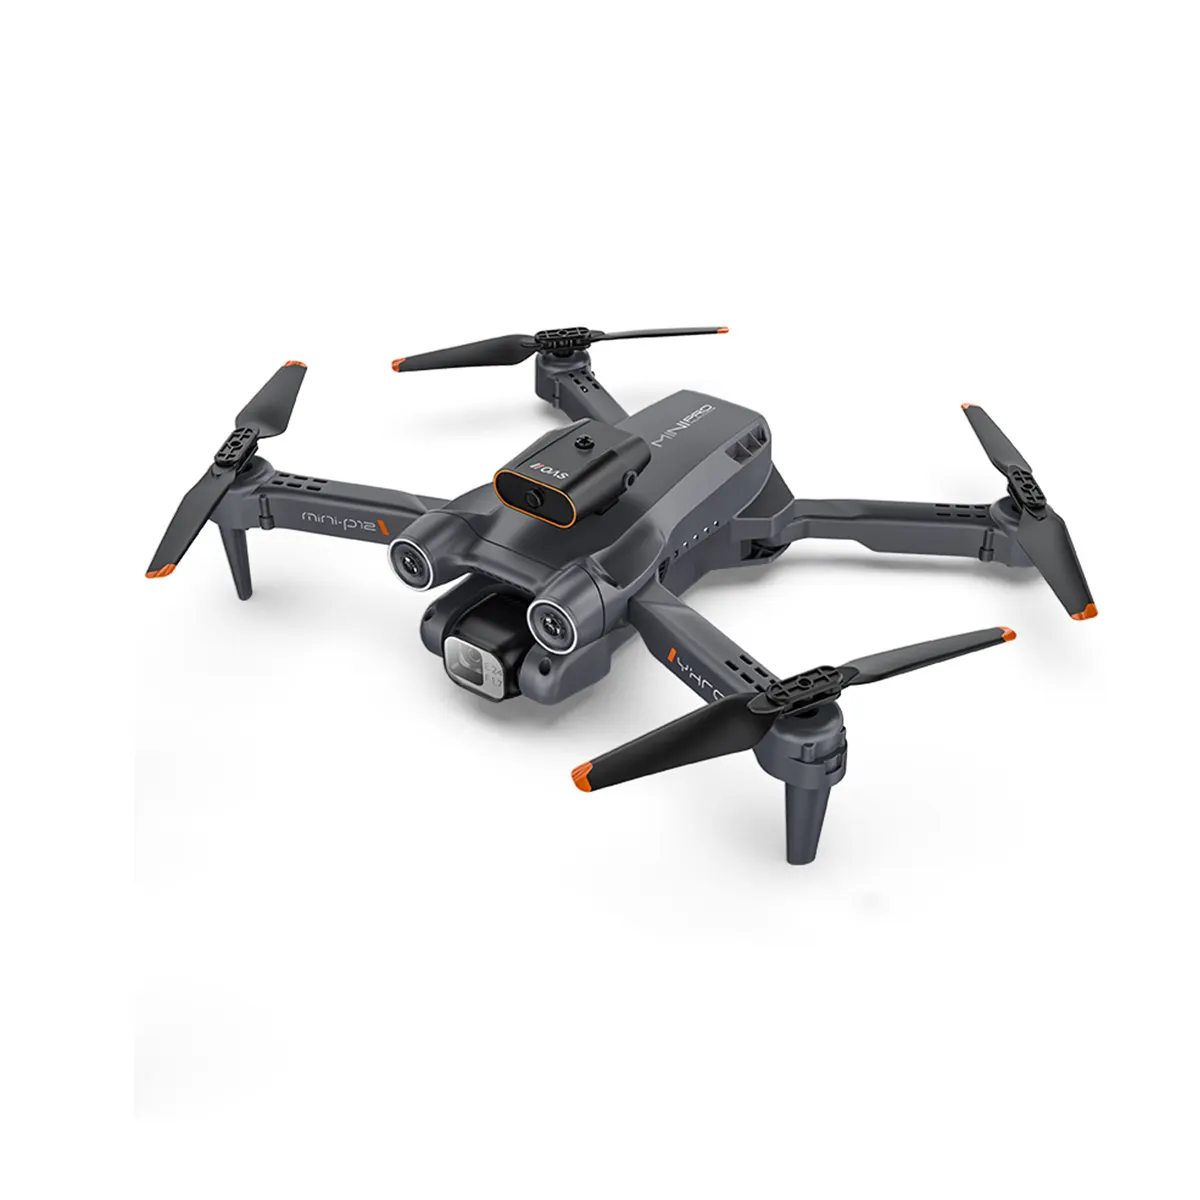 Longxi 6-axis rc drone Gyro remote control quadcopter self-timer FPV long range drone with WIFI HD camera infrared sensor